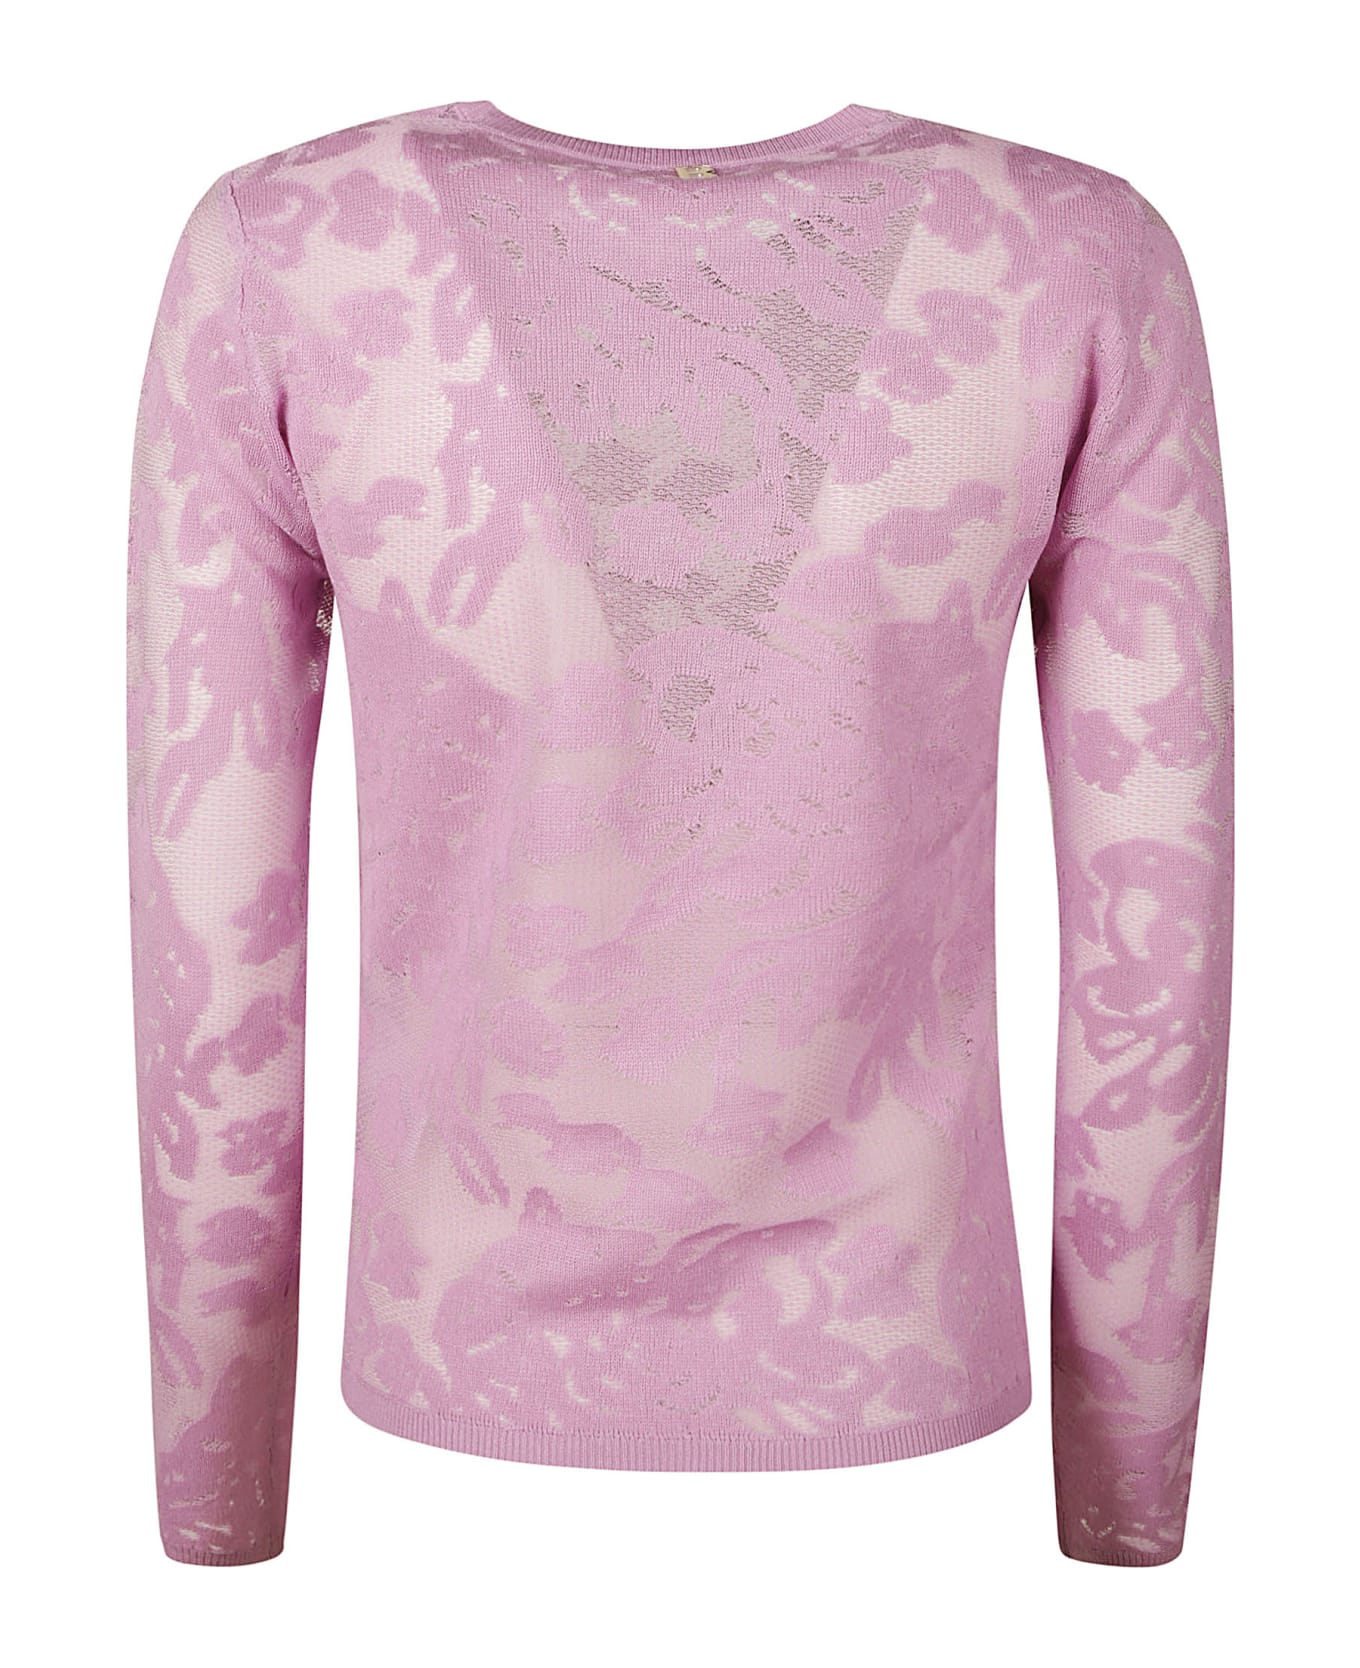 Blugirl Long-sleeved Floral Lace Top - Pink トップス